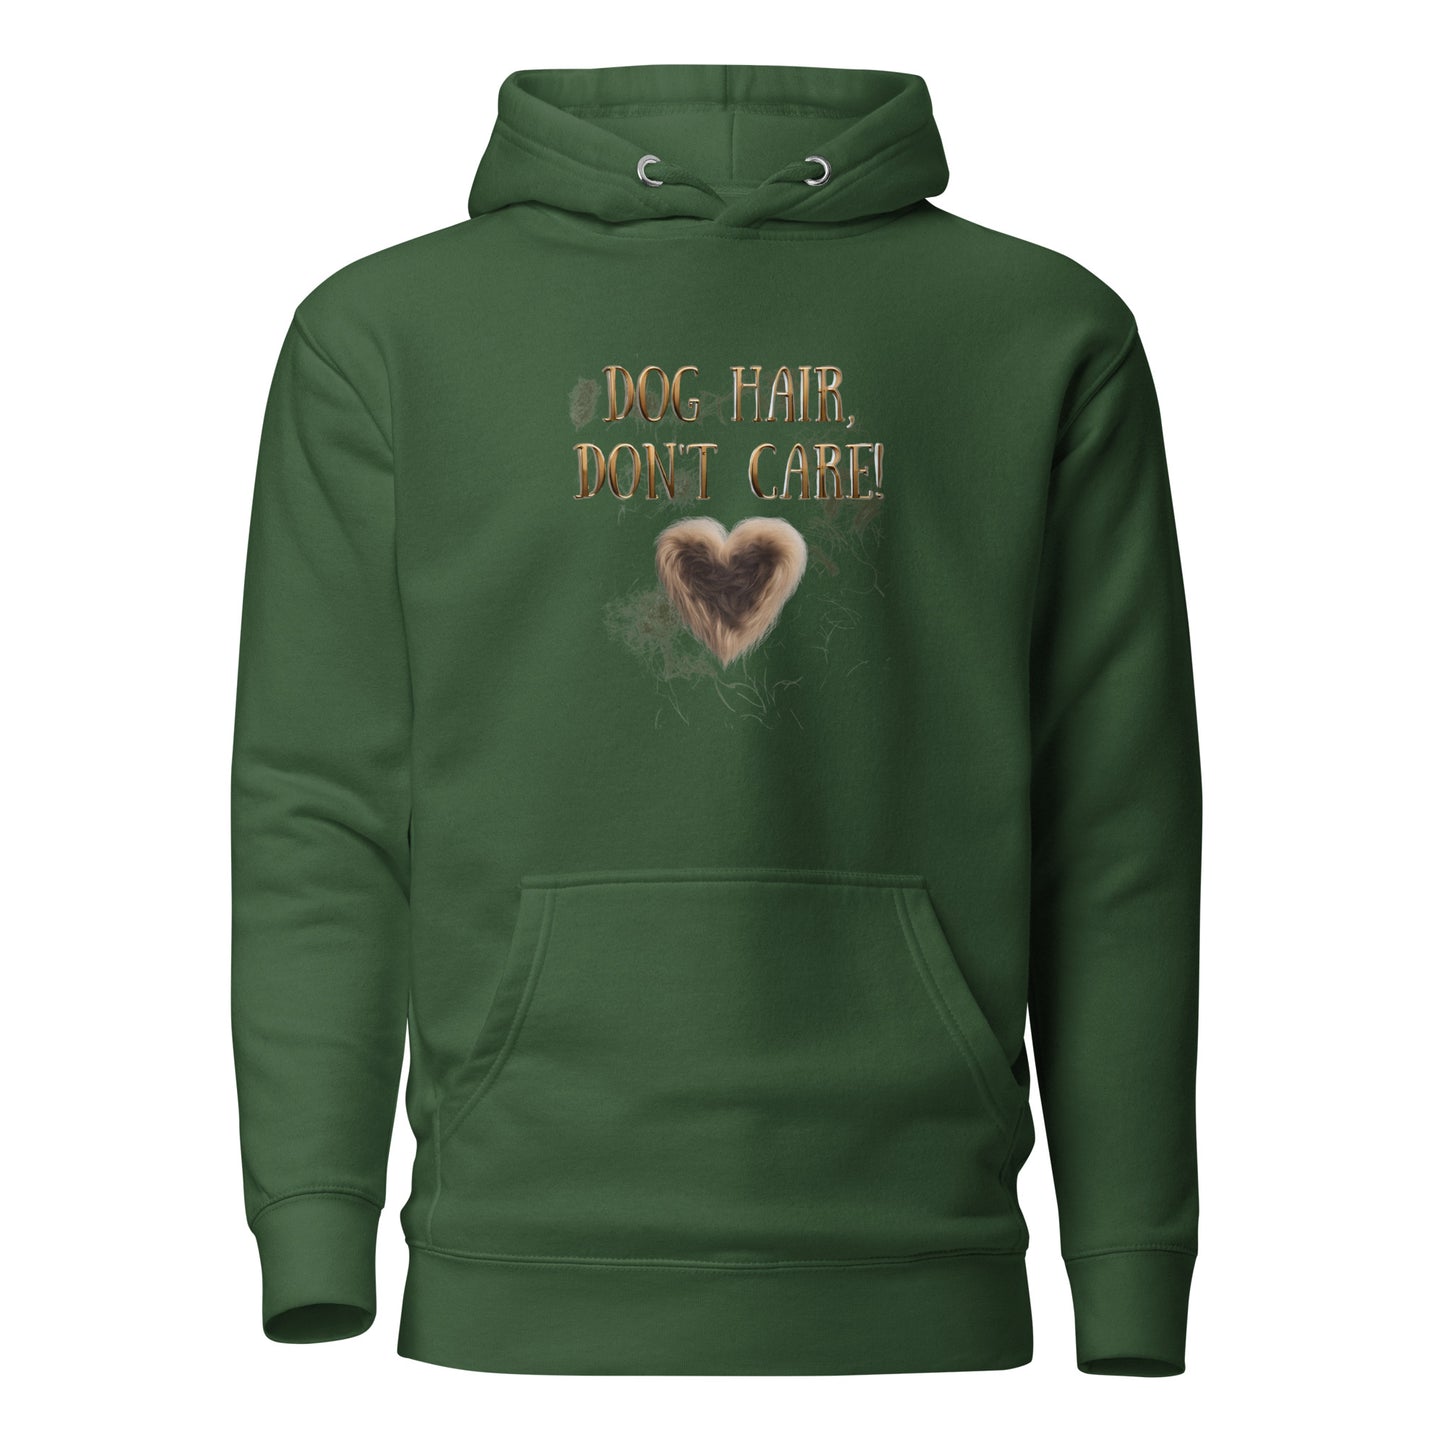 Dog Hair, Don't Care Unisex Hoodie